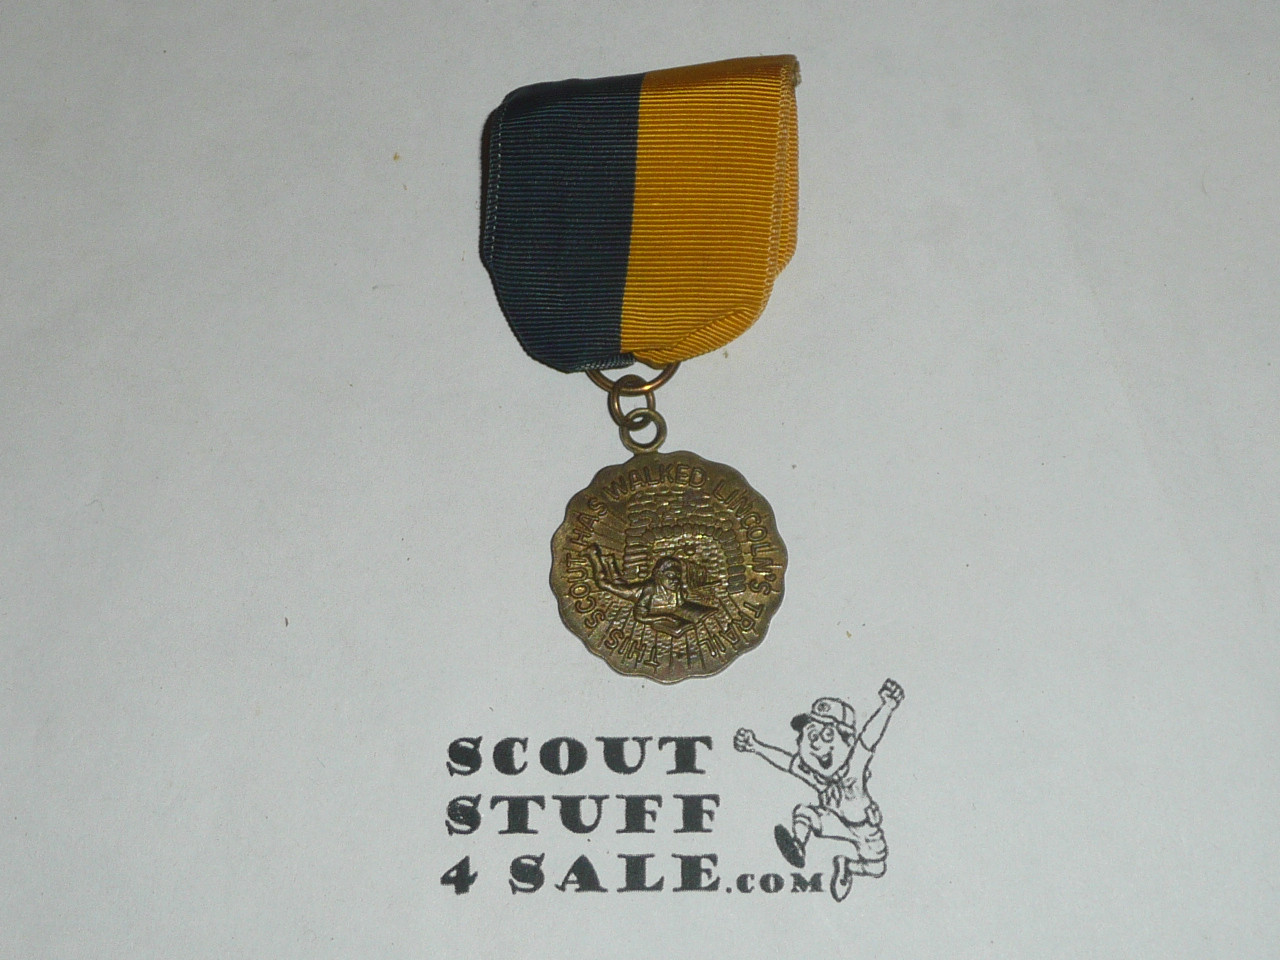 Abraham Lincoln Trail, Boy Scout Trail Medal, Indiana Historical Society